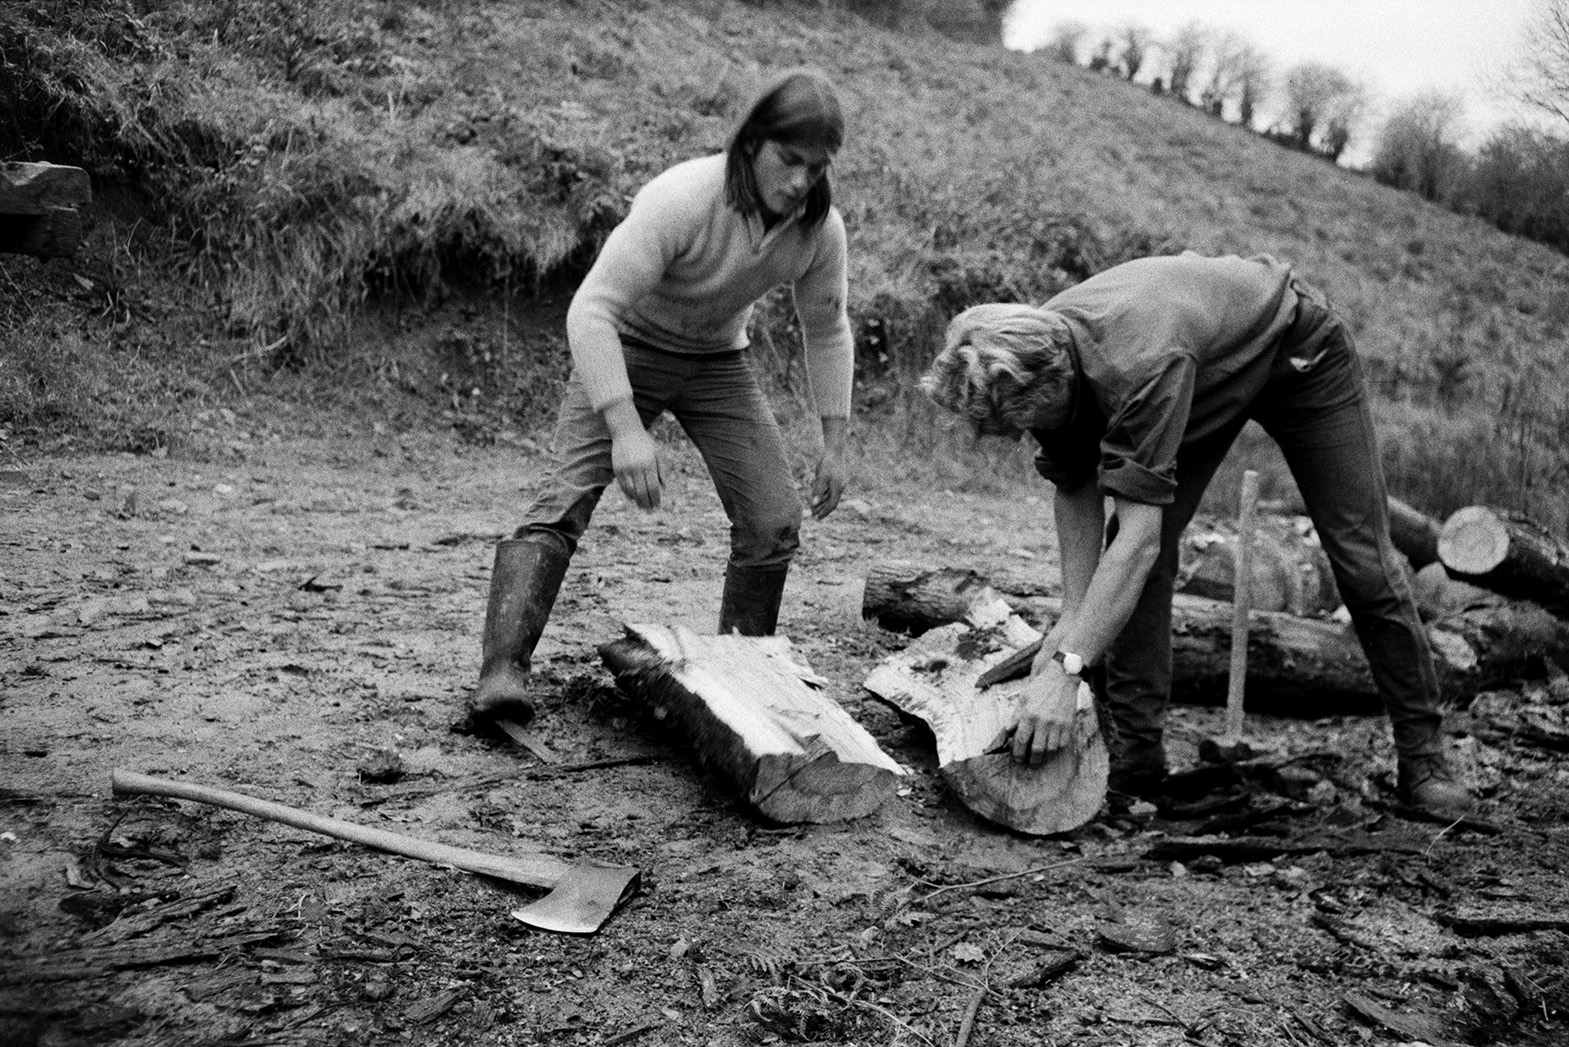 Derek Bright, on the left, helping Ivor Bourne split logs using an axe, wedges and hammer, by a grassy bank, at Mill Road Farm, Beaford. The farm was also known as Jeffrys.